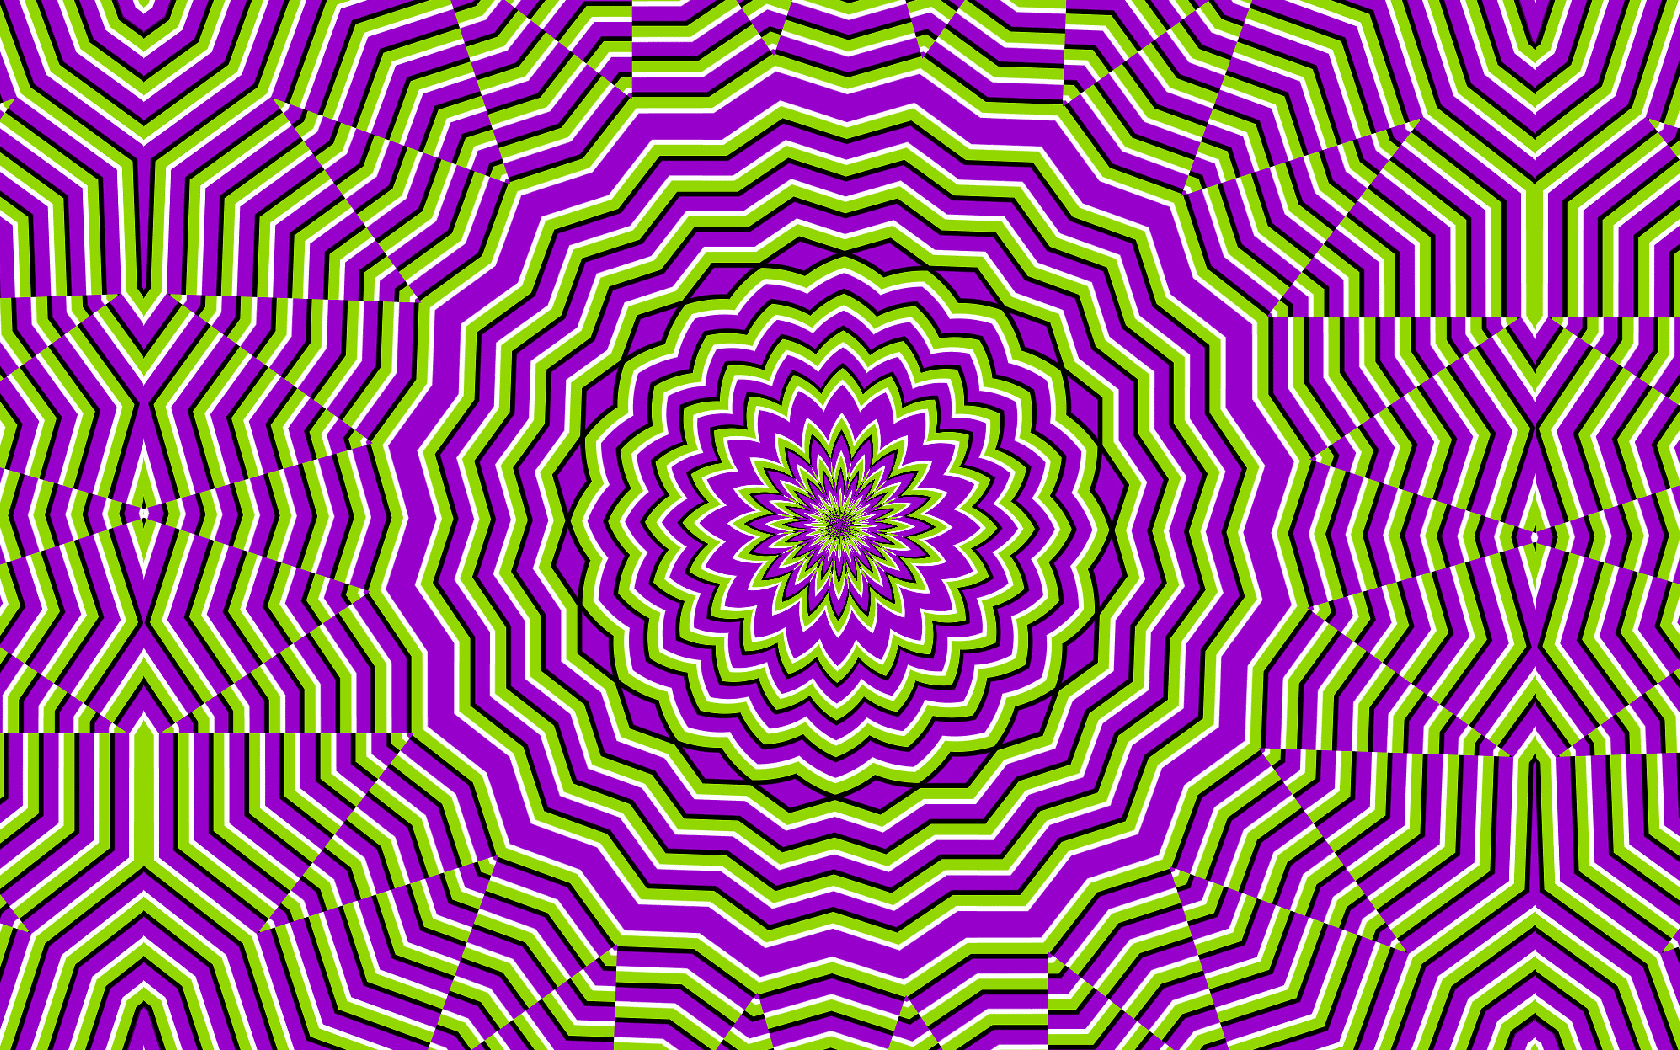 As Optical Illusions Background